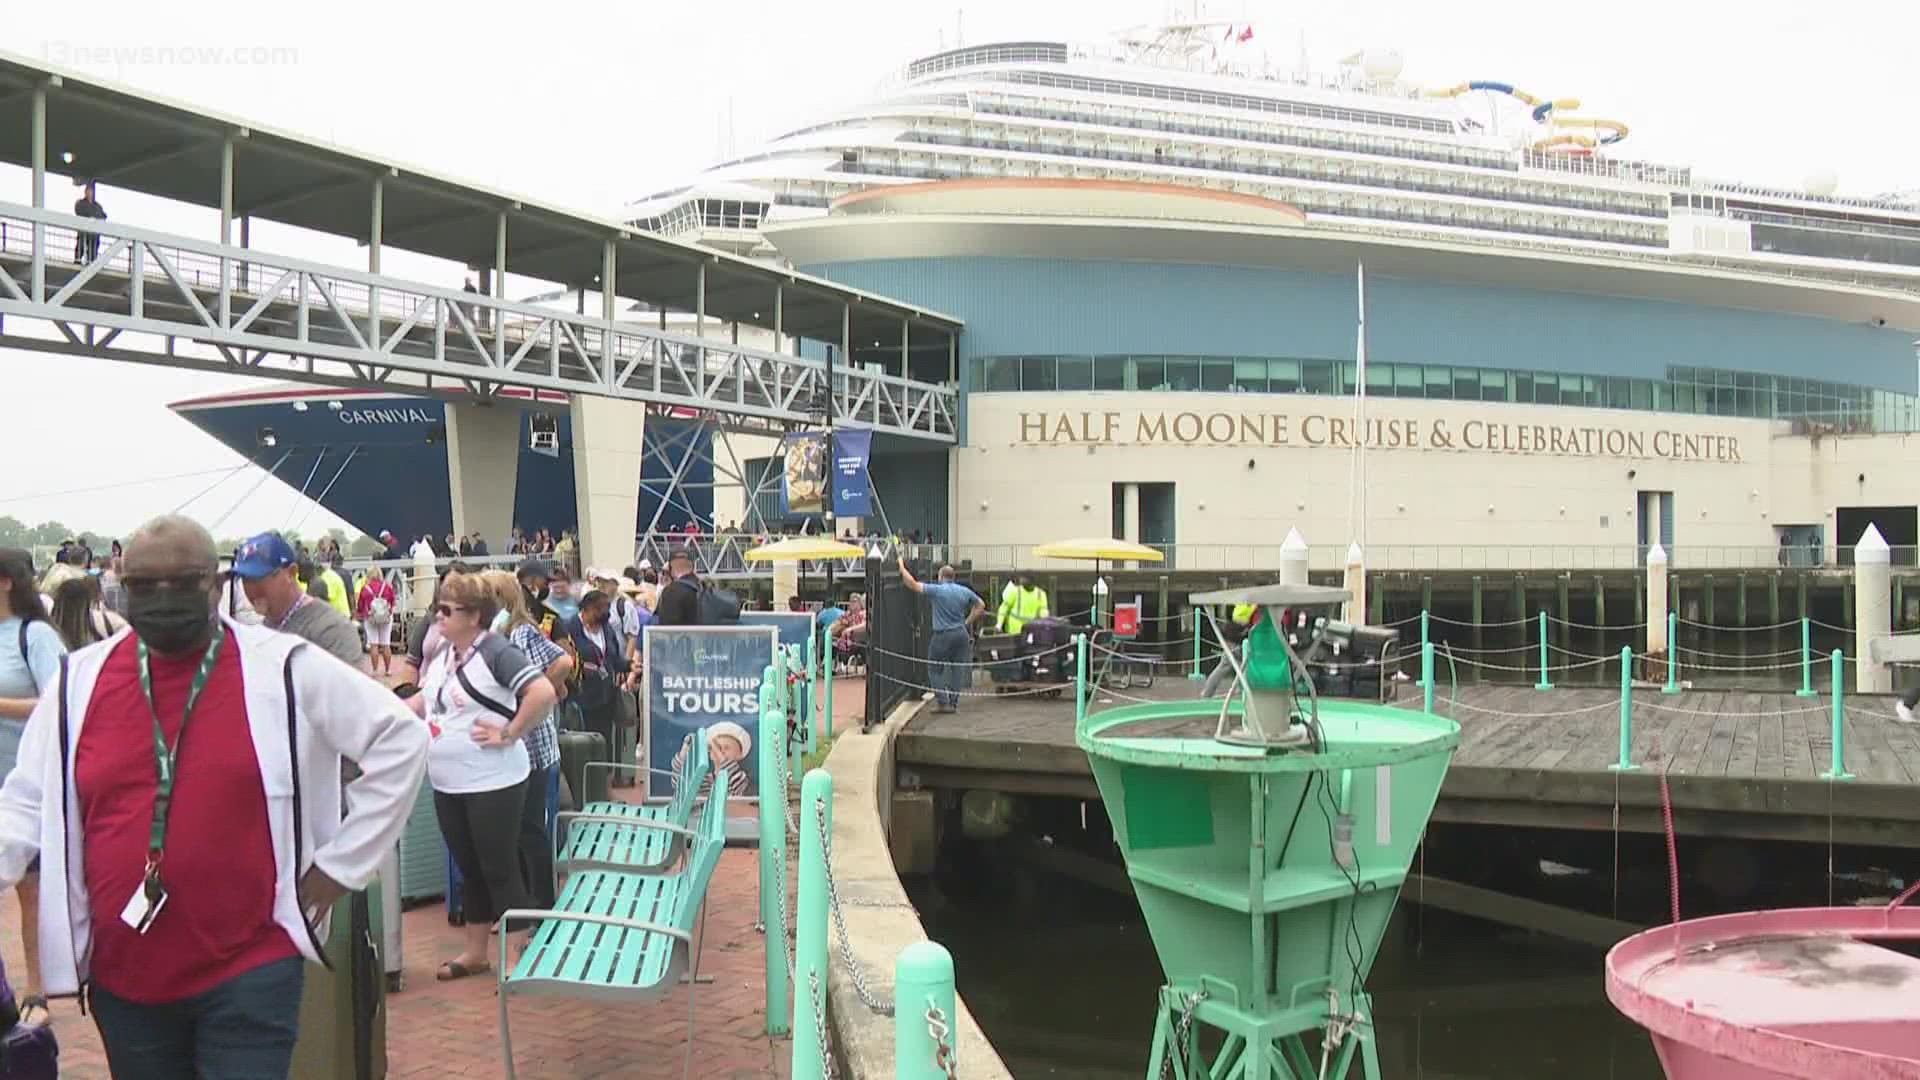 The U.S. Coast Guard said it would investigate after passengers reported nausea and vomiting from a chemical smell and fumes on the cruise ship.